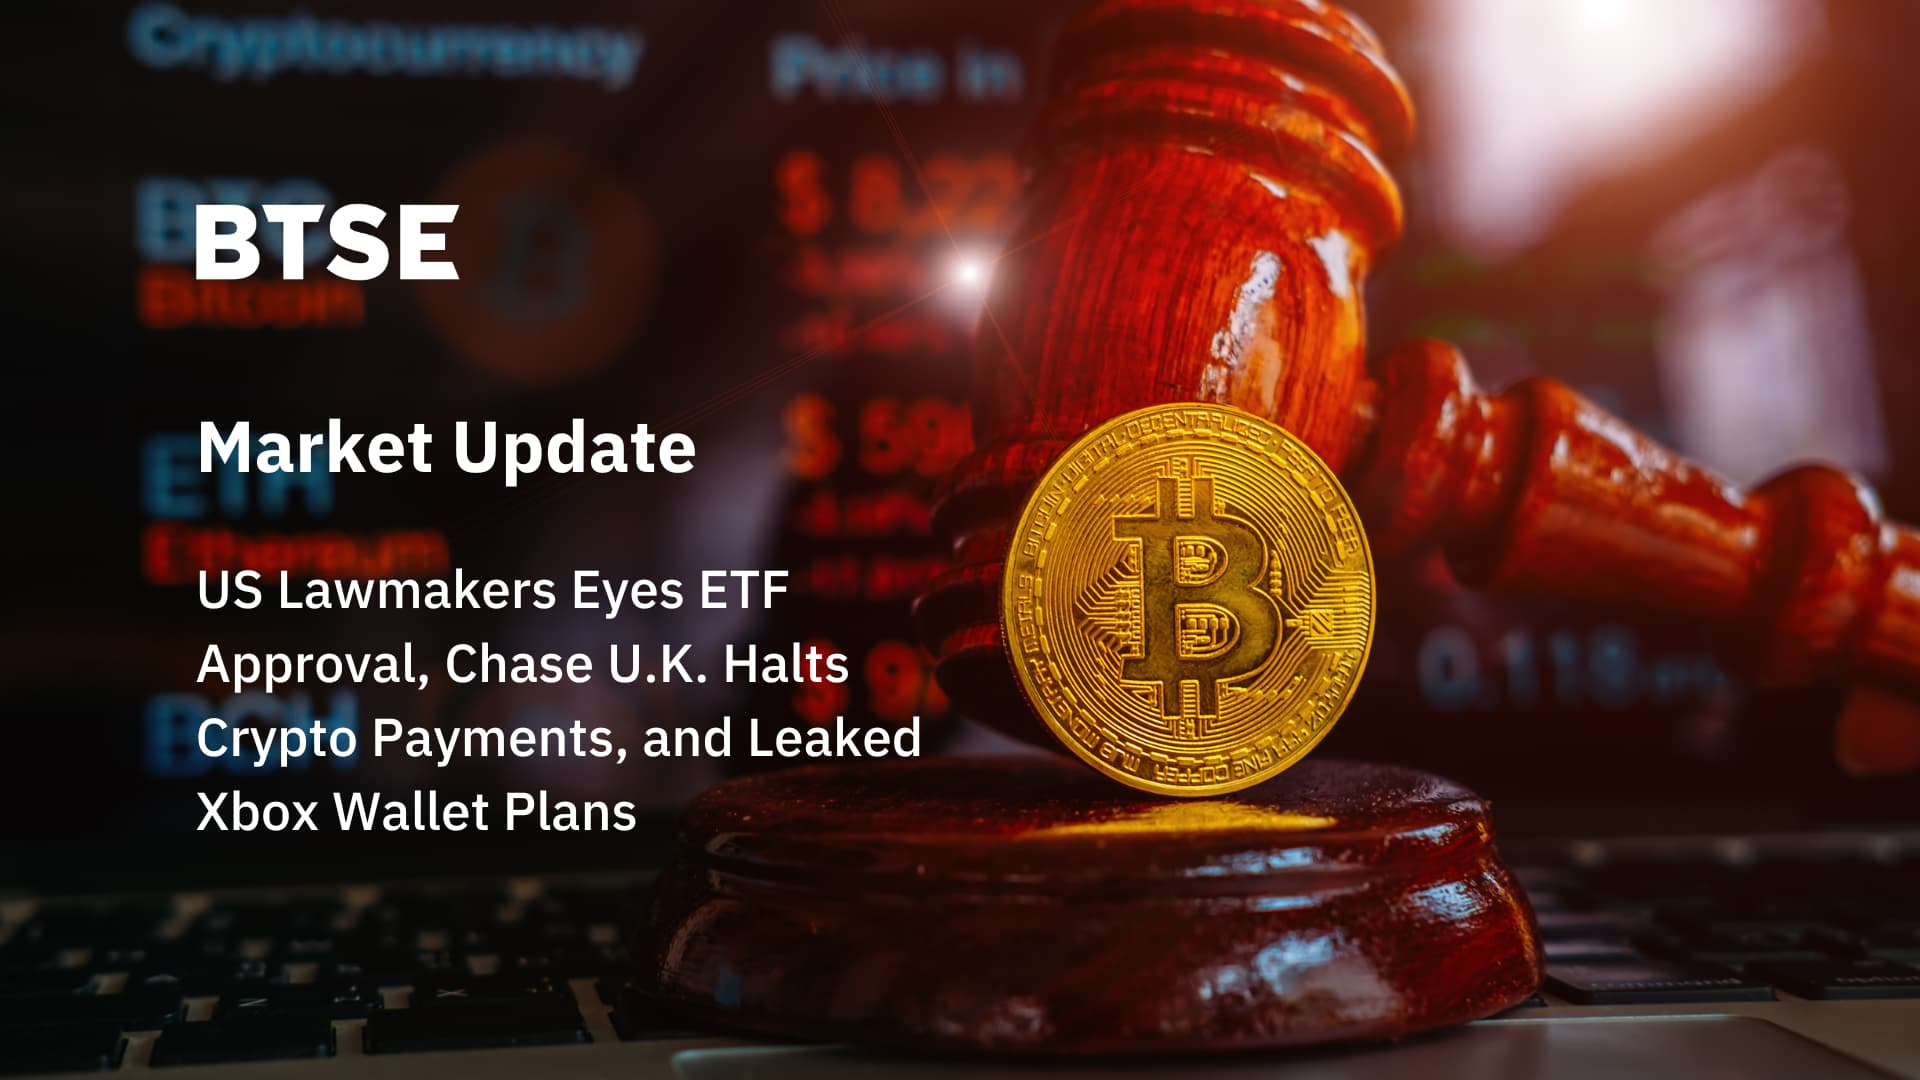 US Lawmakers Eyes ETF Approval, Chase U.K. Halts Crypto Payments, and Leaked Xbox Wallet Plans